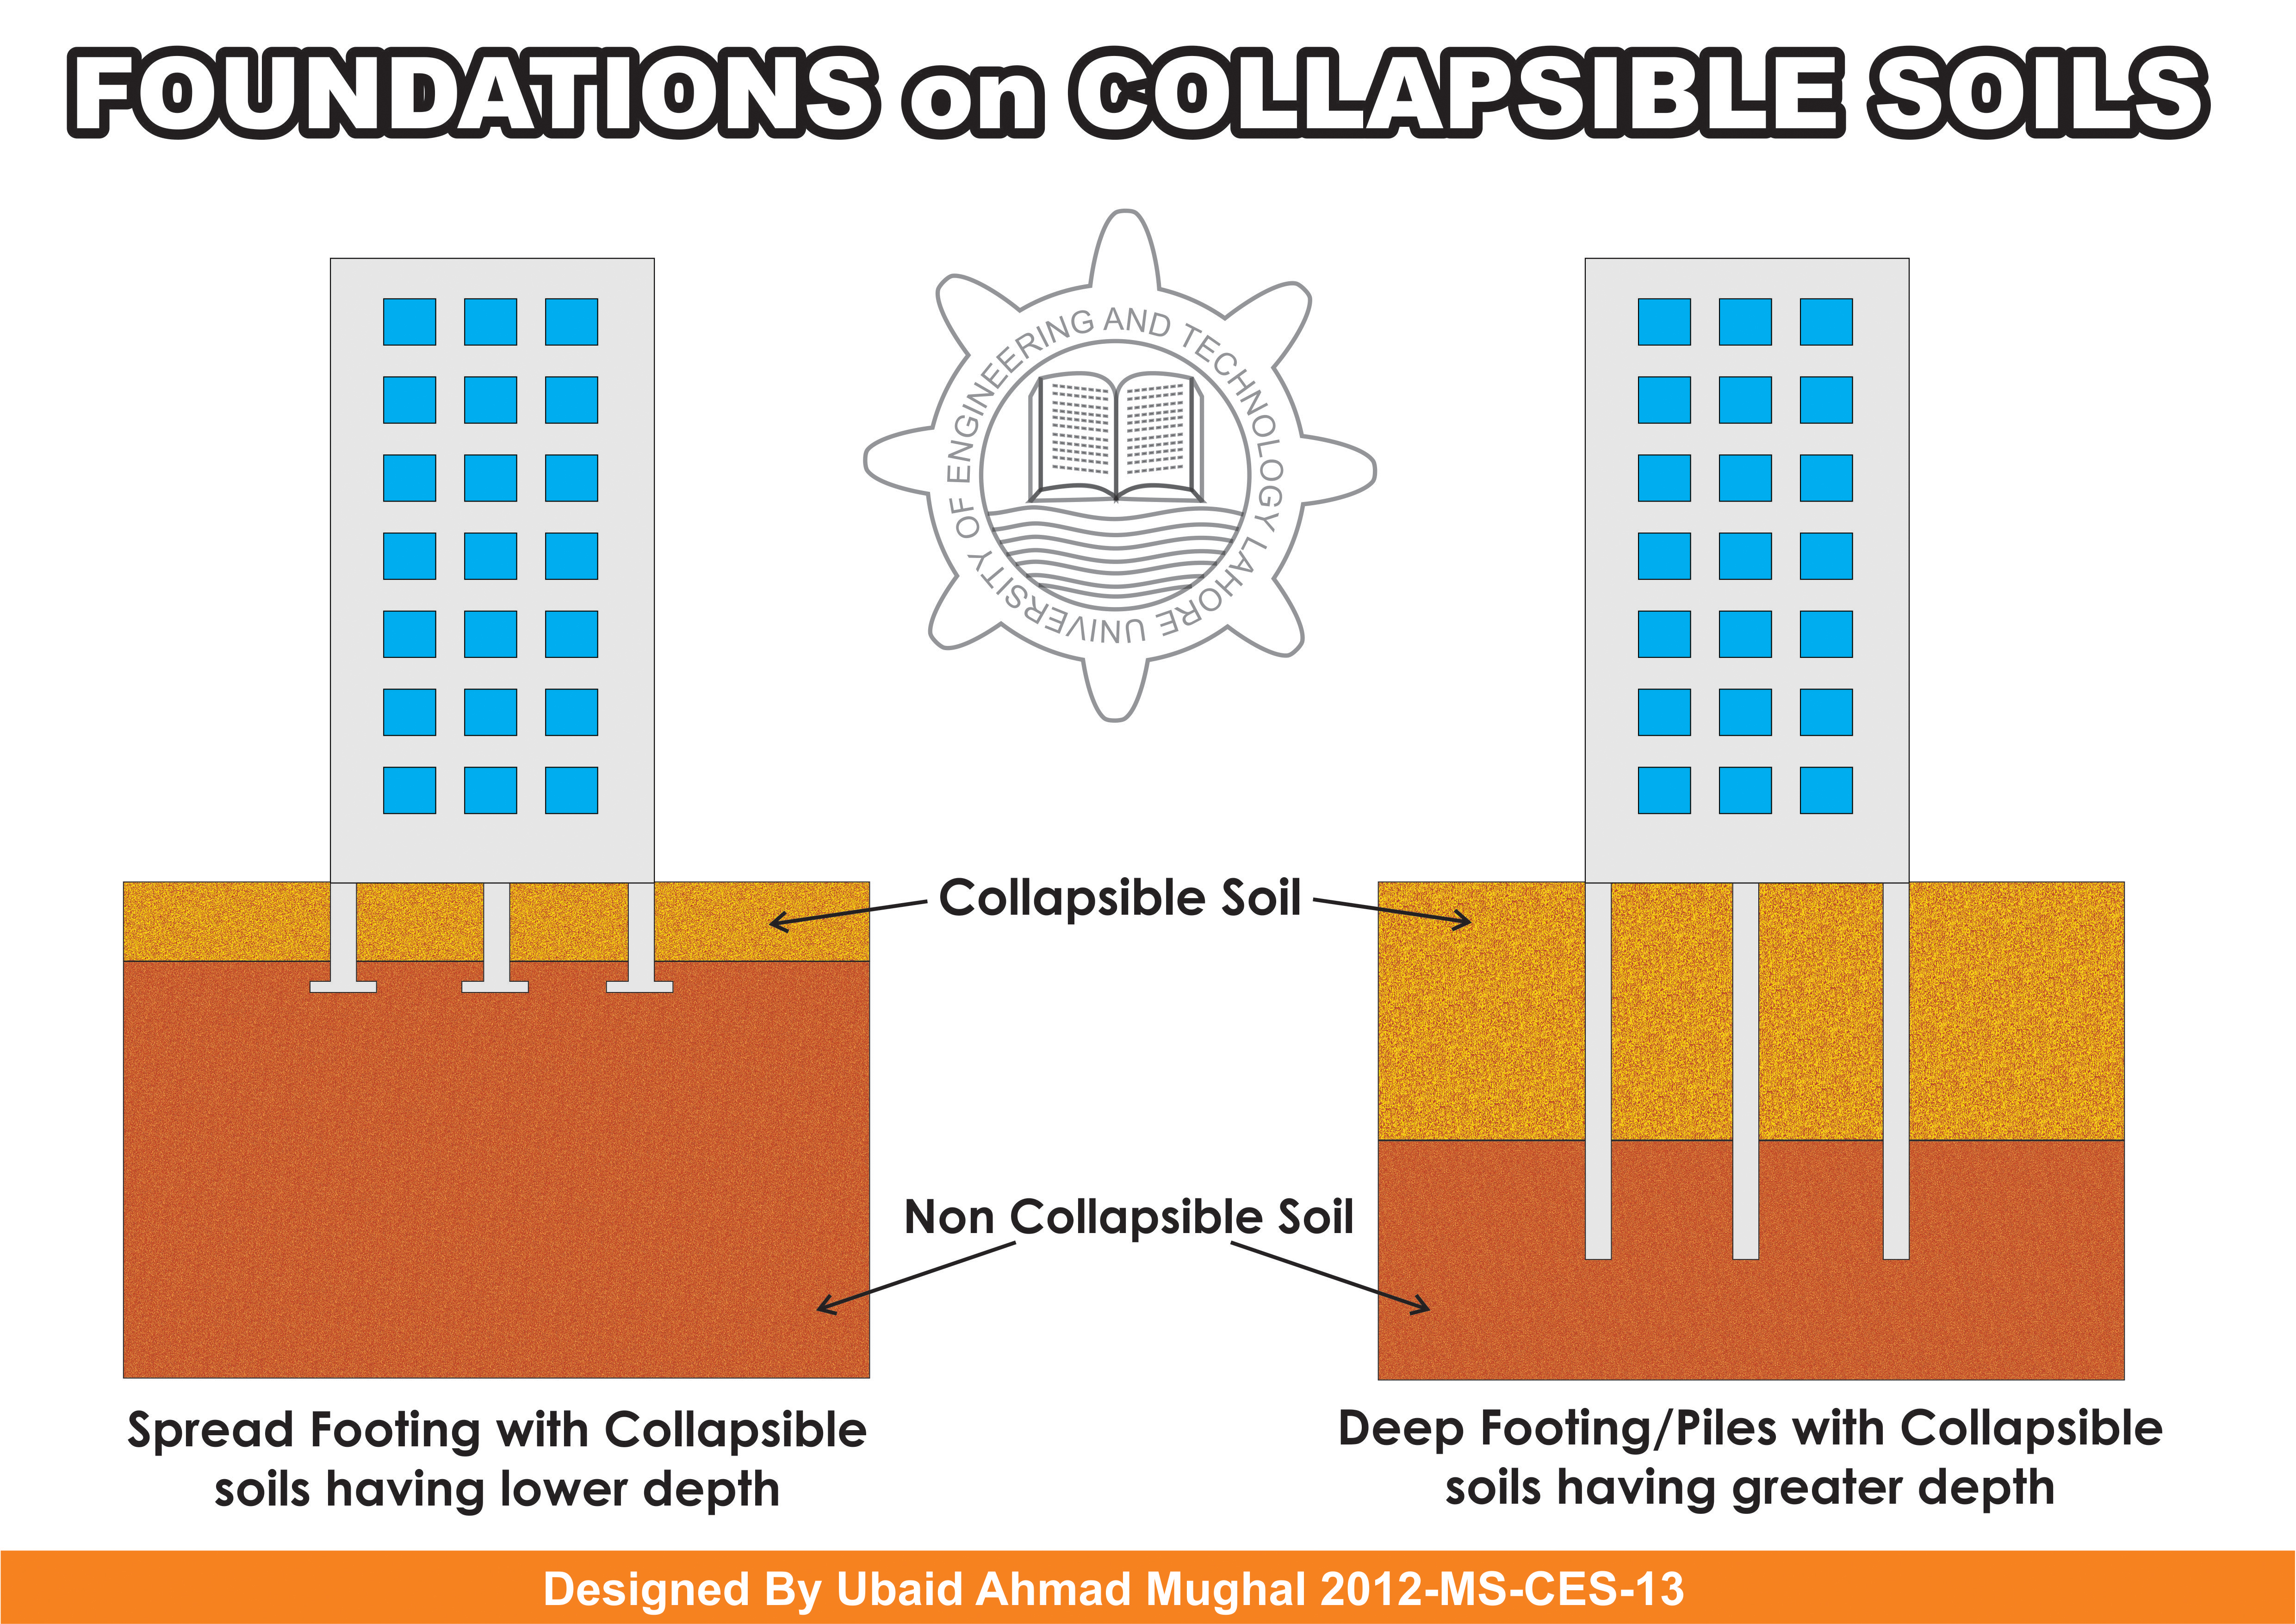 Collapsible soils